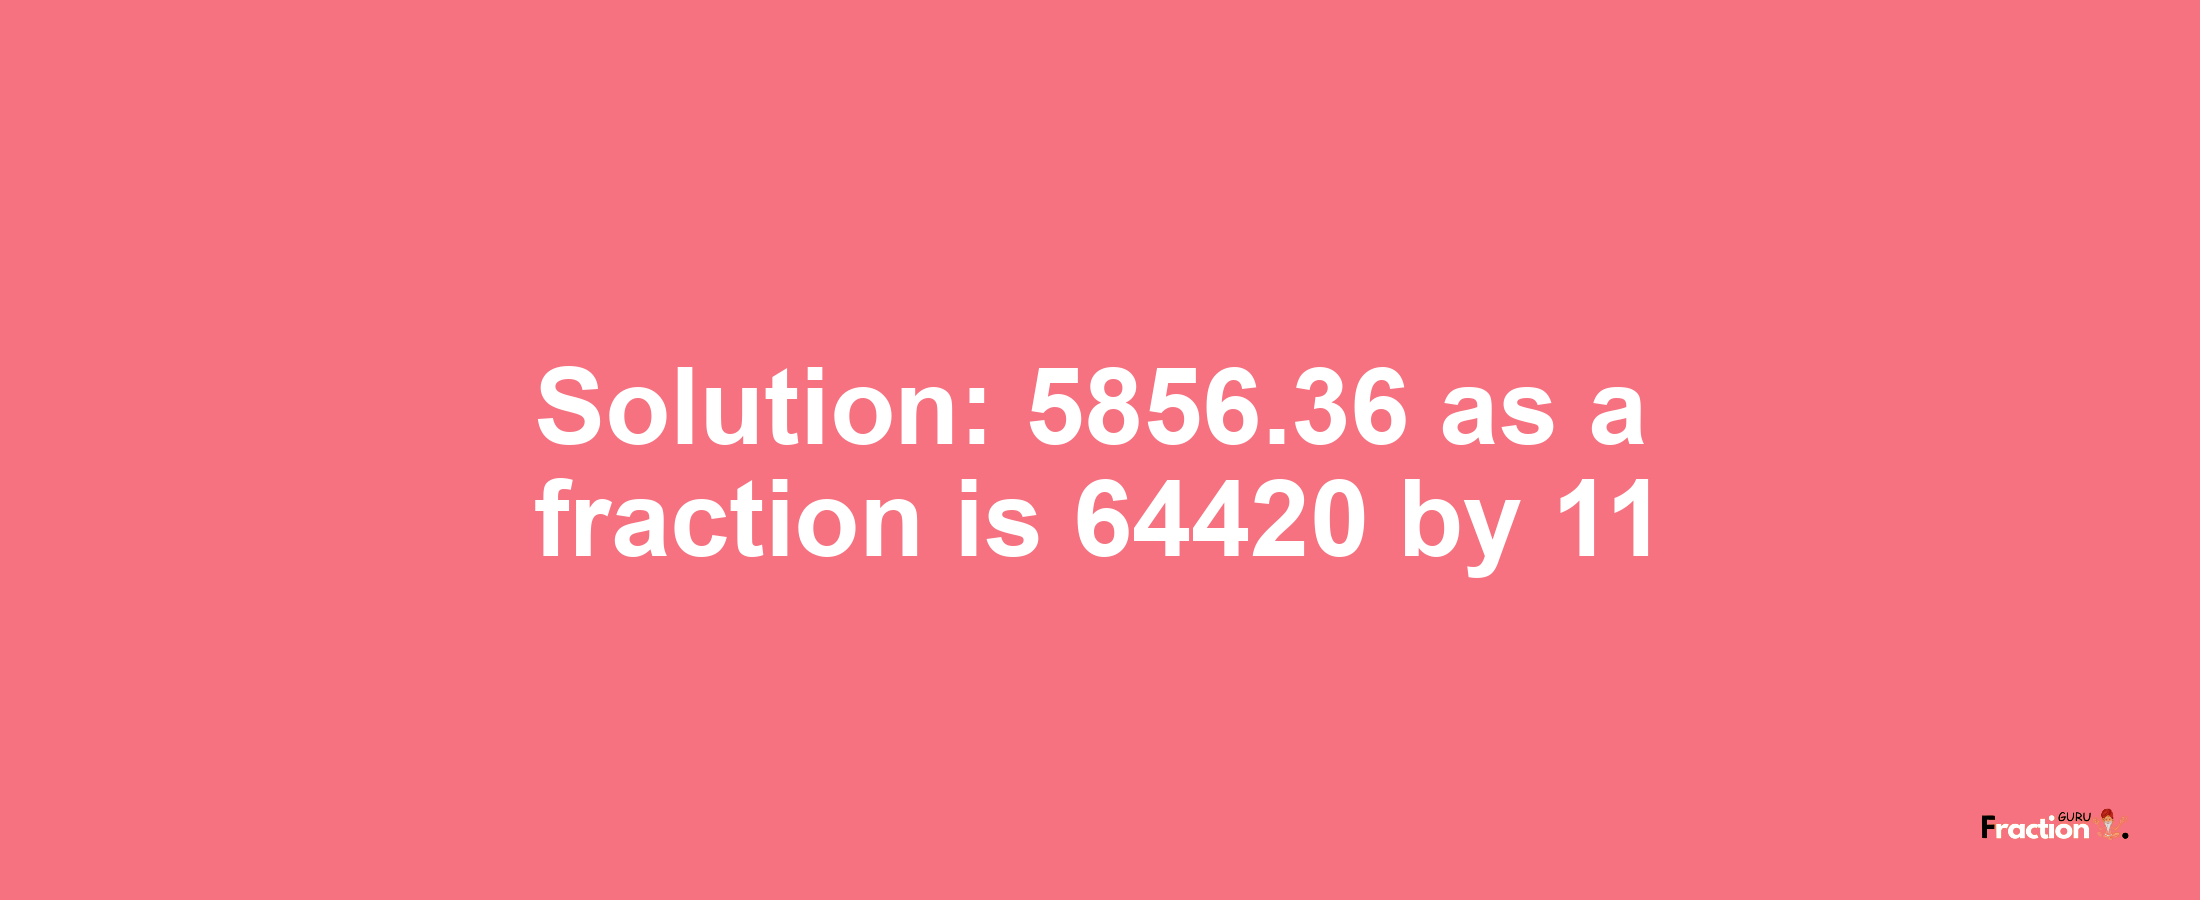 Solution:5856.36 as a fraction is 64420/11